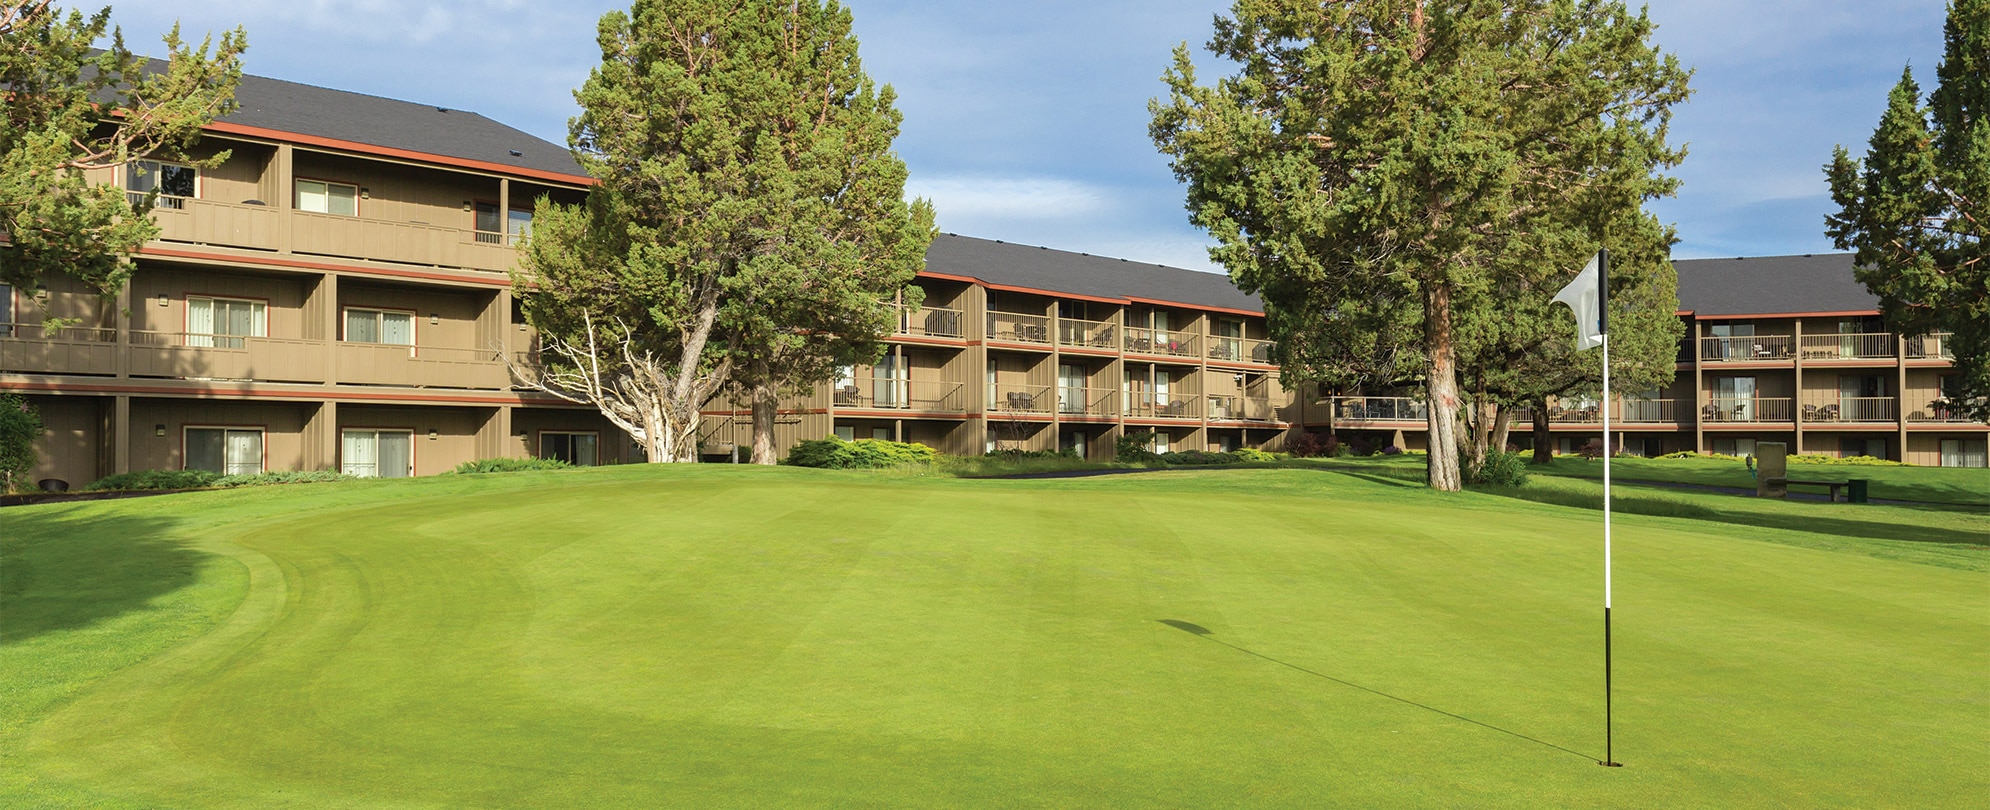 Golf course at Worldmark Eagle Crest, a timeshare resort in Redmond, OR.